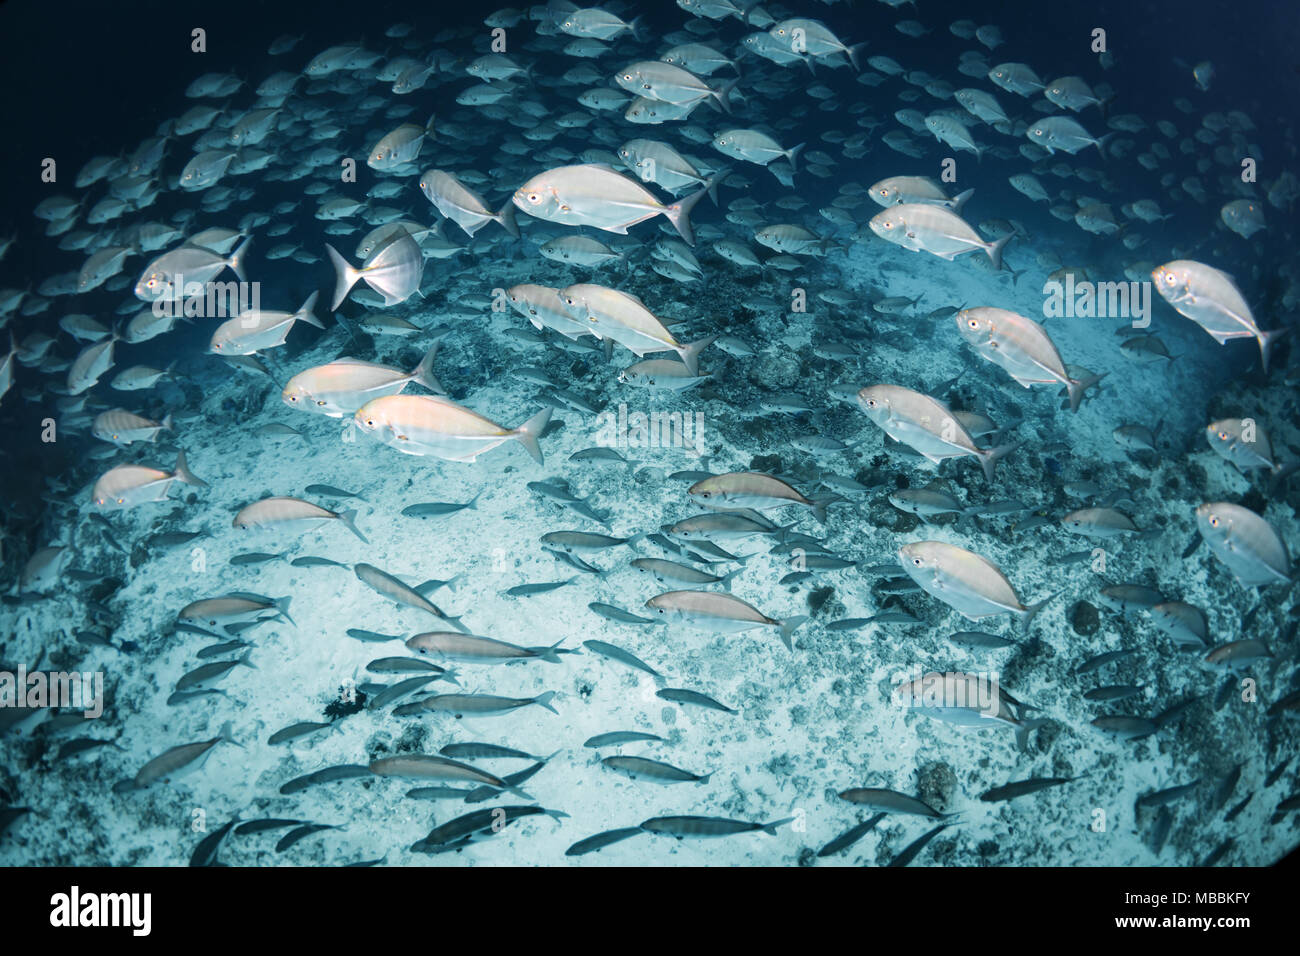 Large group of silver blue runner jacks, Caranx crysos, swimming over coral reef Stock Photo